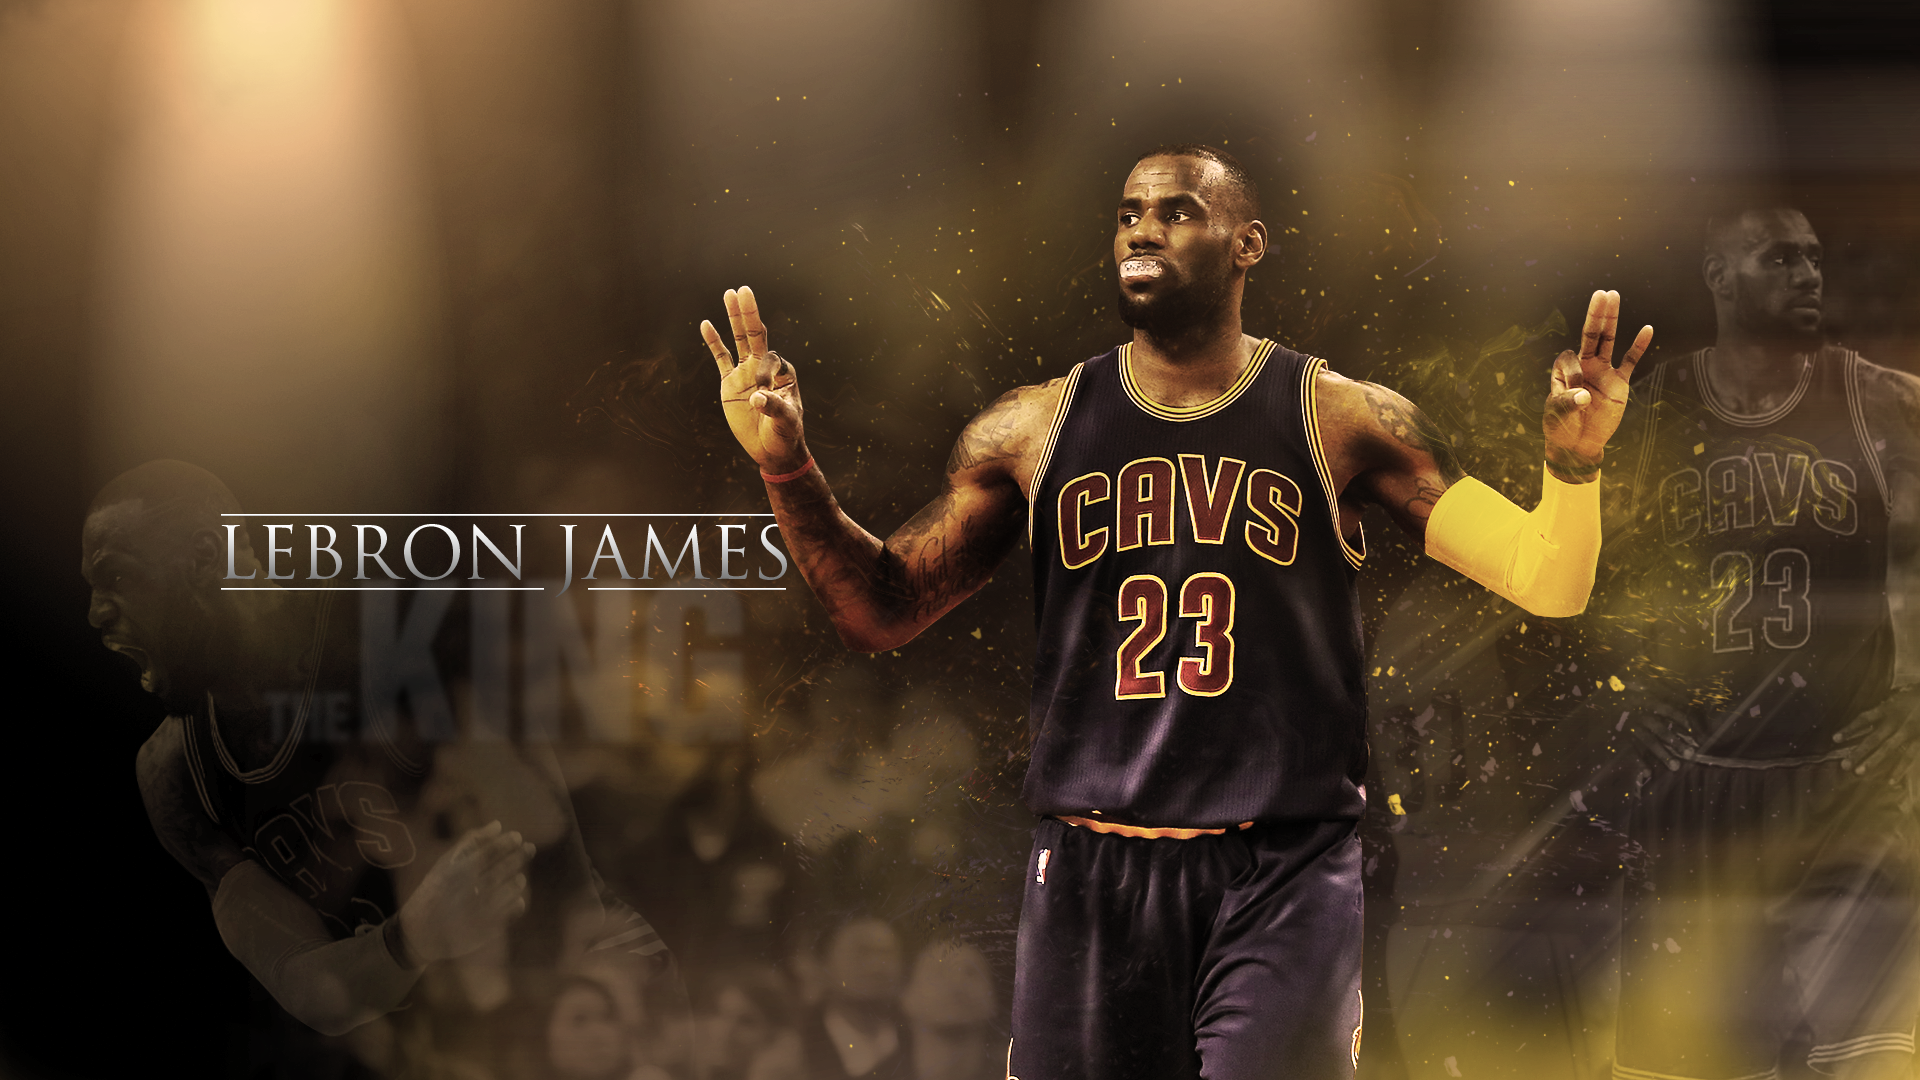 Lebron james wallpaper cleveland cavaliers by chaseps on